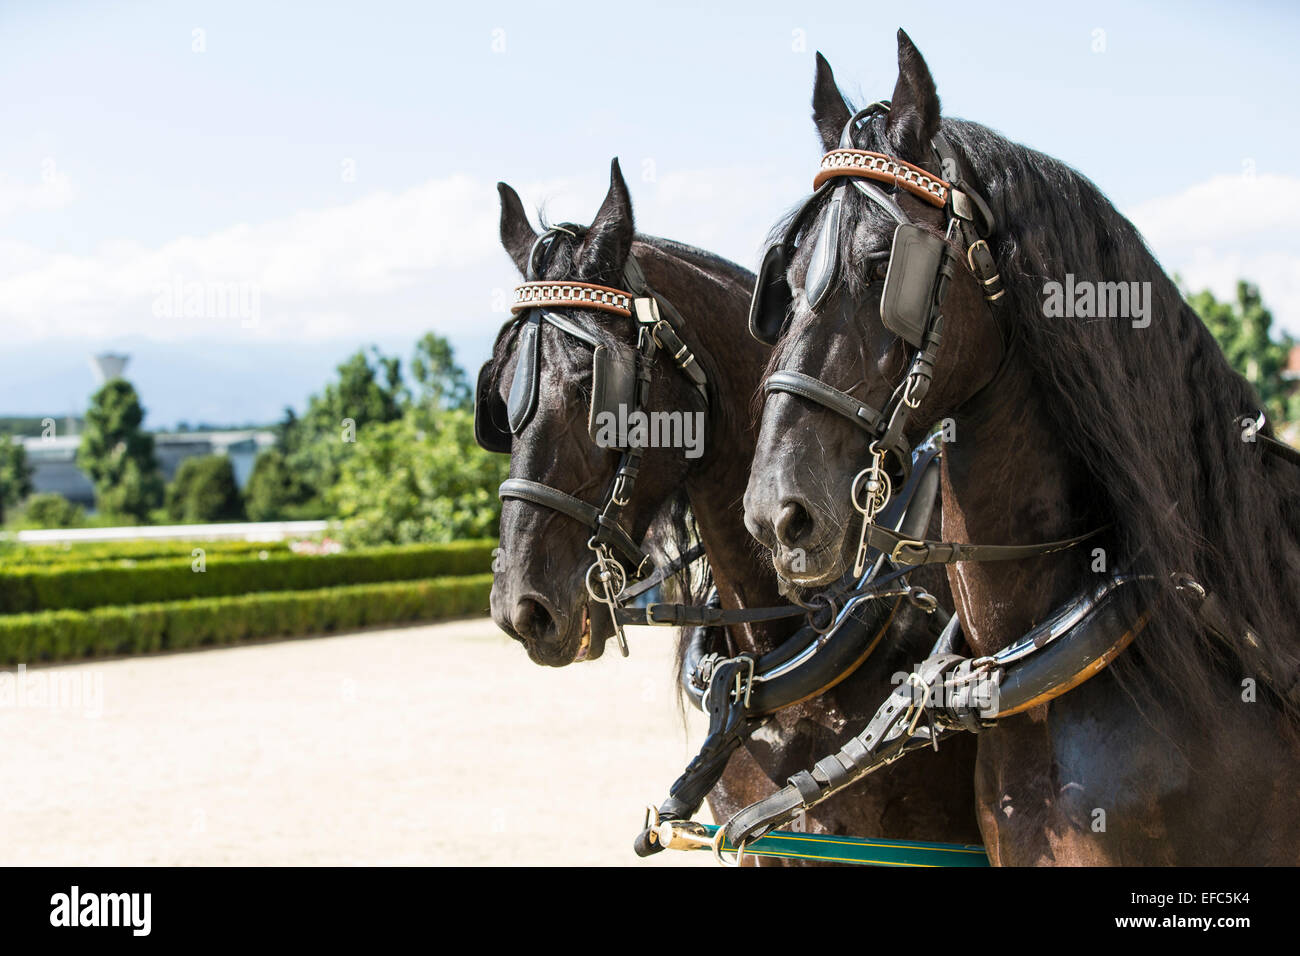 International competition for traditional carriages "La Venaria Reale", a pair of Friesian horses. Stock Photo